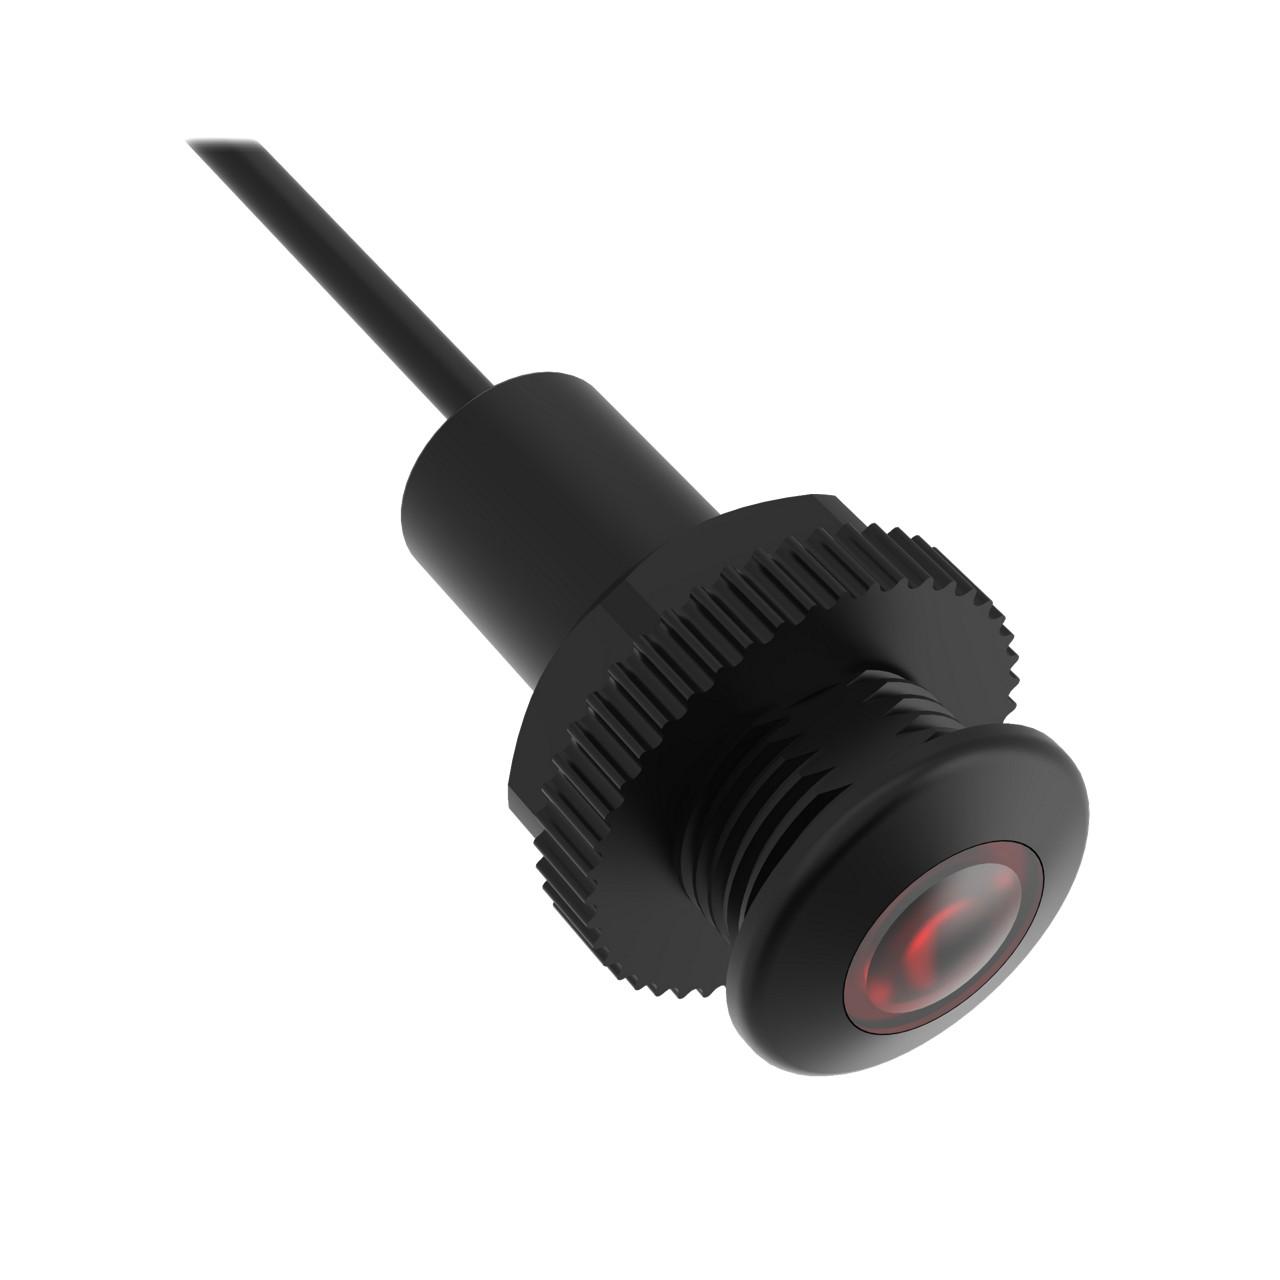 Banner SB12TE1Q3 Photo-electric emitter with through-beam system / opposed mode - Banner Engineering (SB12 series) - Part #11139 - 12mm diameter - Infrared (IR) light - Supply voltage 10Vdc-30Vdc (12Vdc / 24Vdc nom.) - Pre-wired with 6" / 150mm pigtail terminated with 3-p